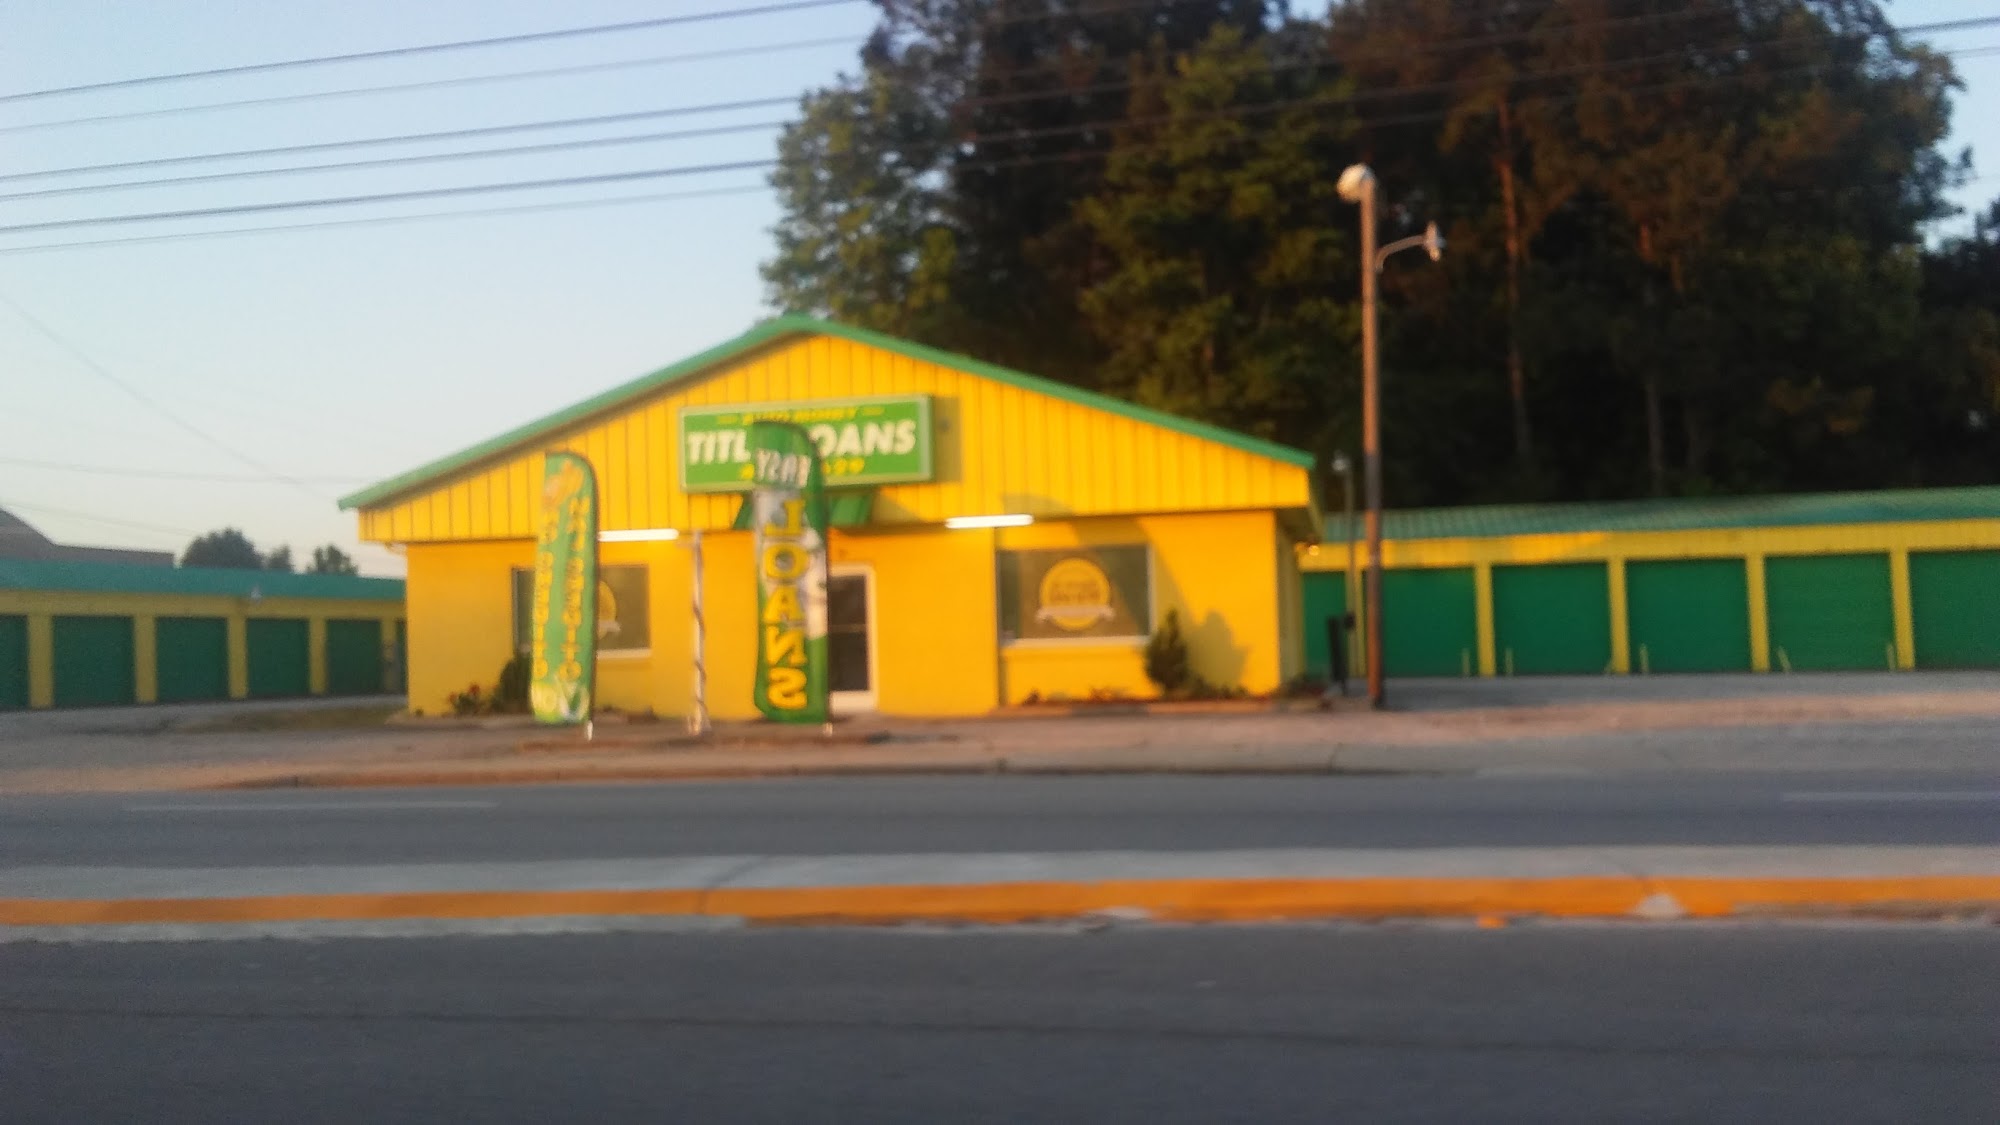 Auto Money 1993 Paxville Hwy, Manning South Carolina 29102